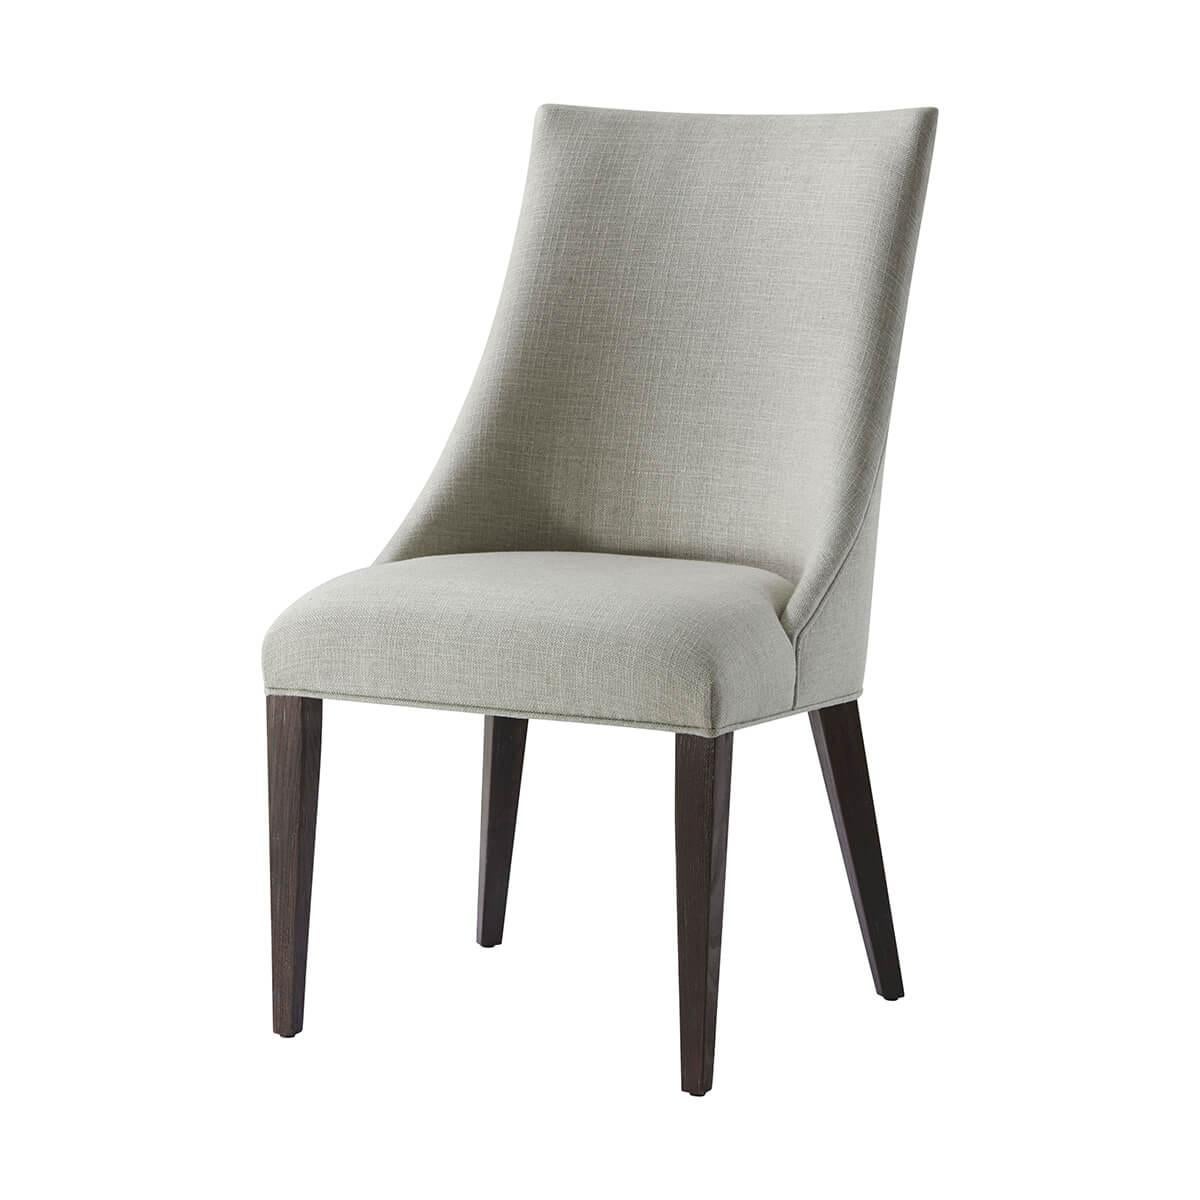 This beautifully designed chair combines classic style with modern functionality, making it a versatile addition to any interior. It features a scoop back and a tight seat cushion, all upholstered in a durable performance fabric, which offers both